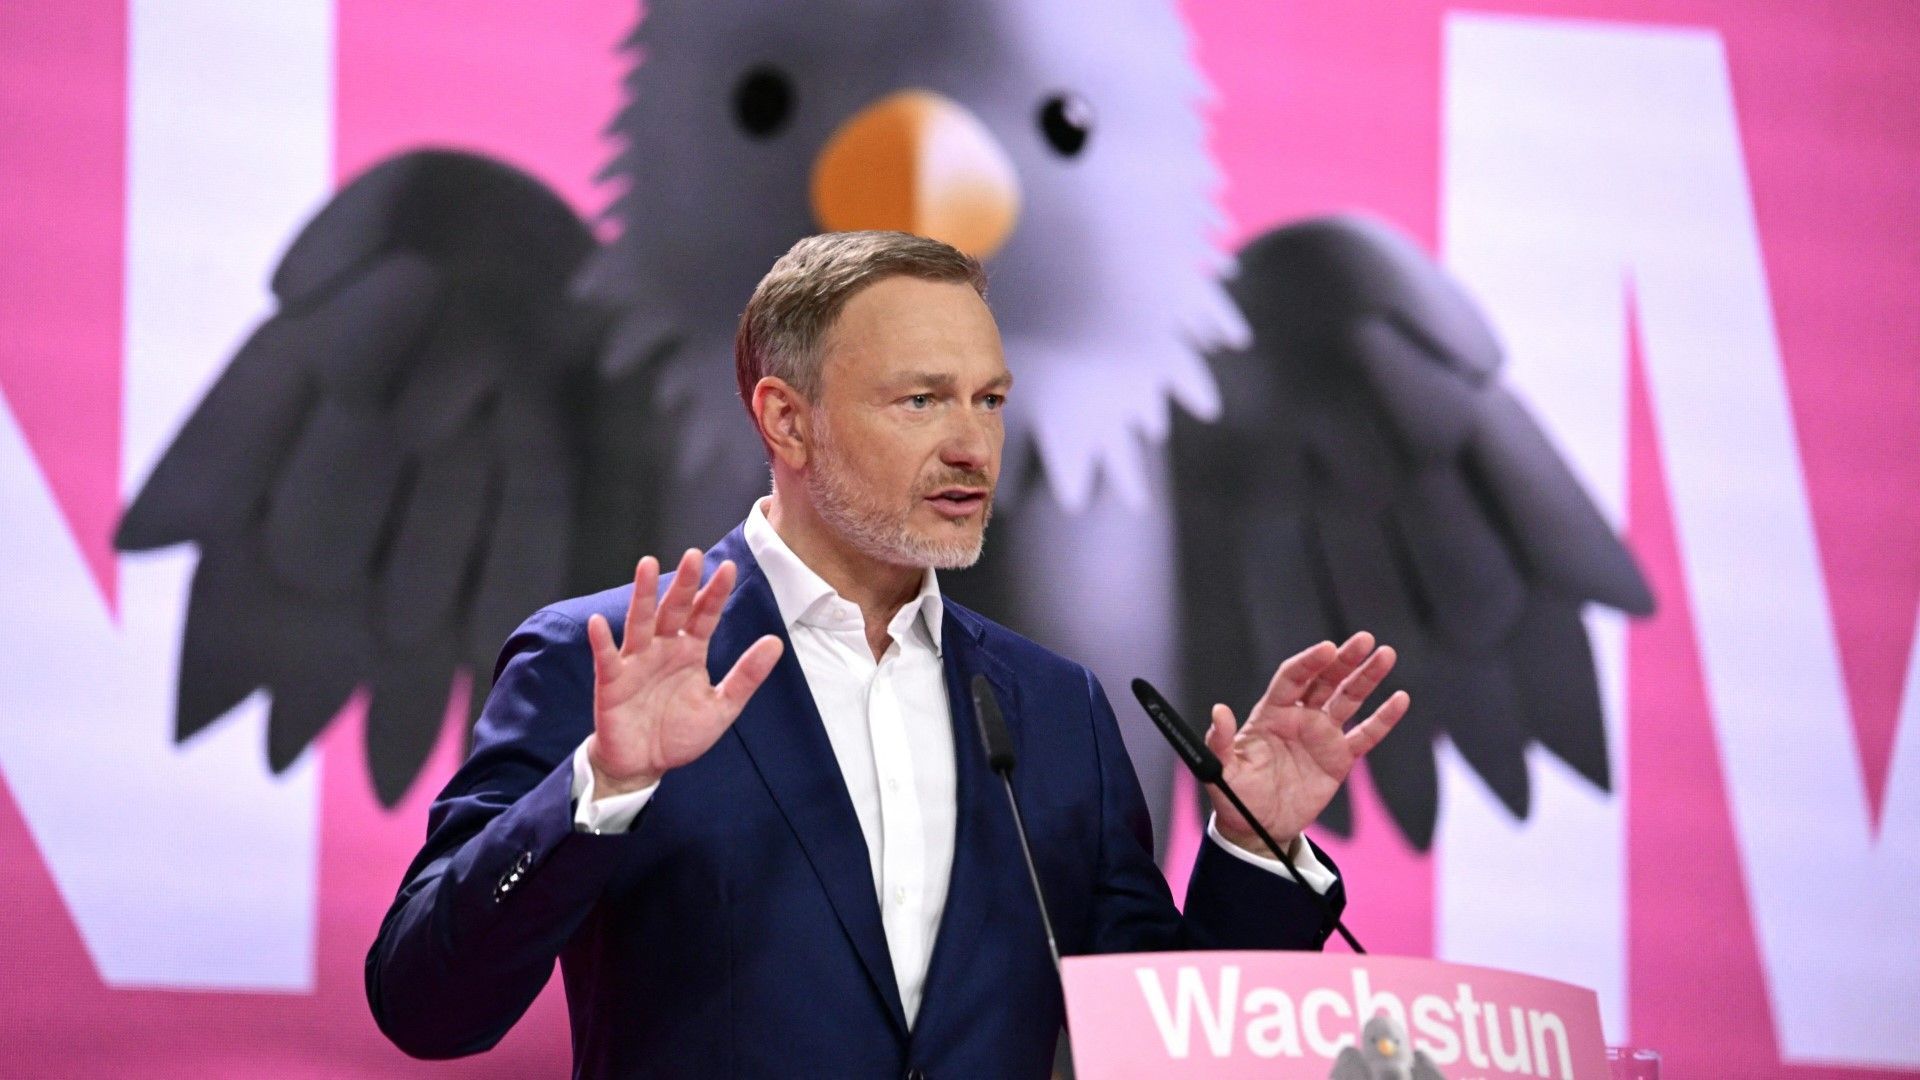 FDP party conference calls for an “economic turnaround for Germany”